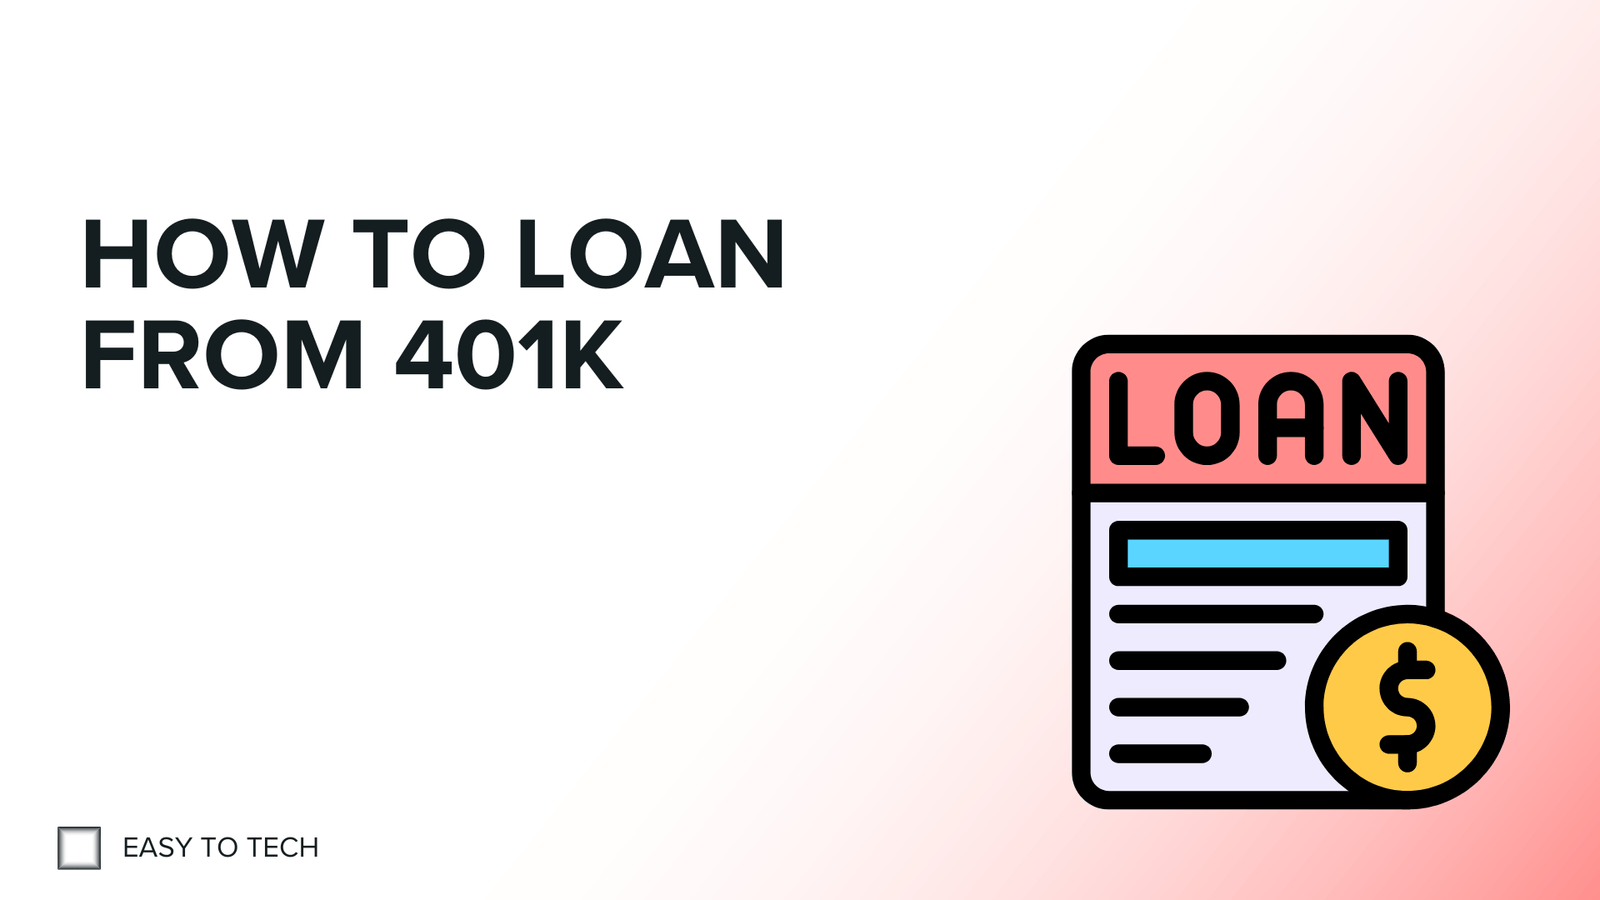 How to Loan from 401k